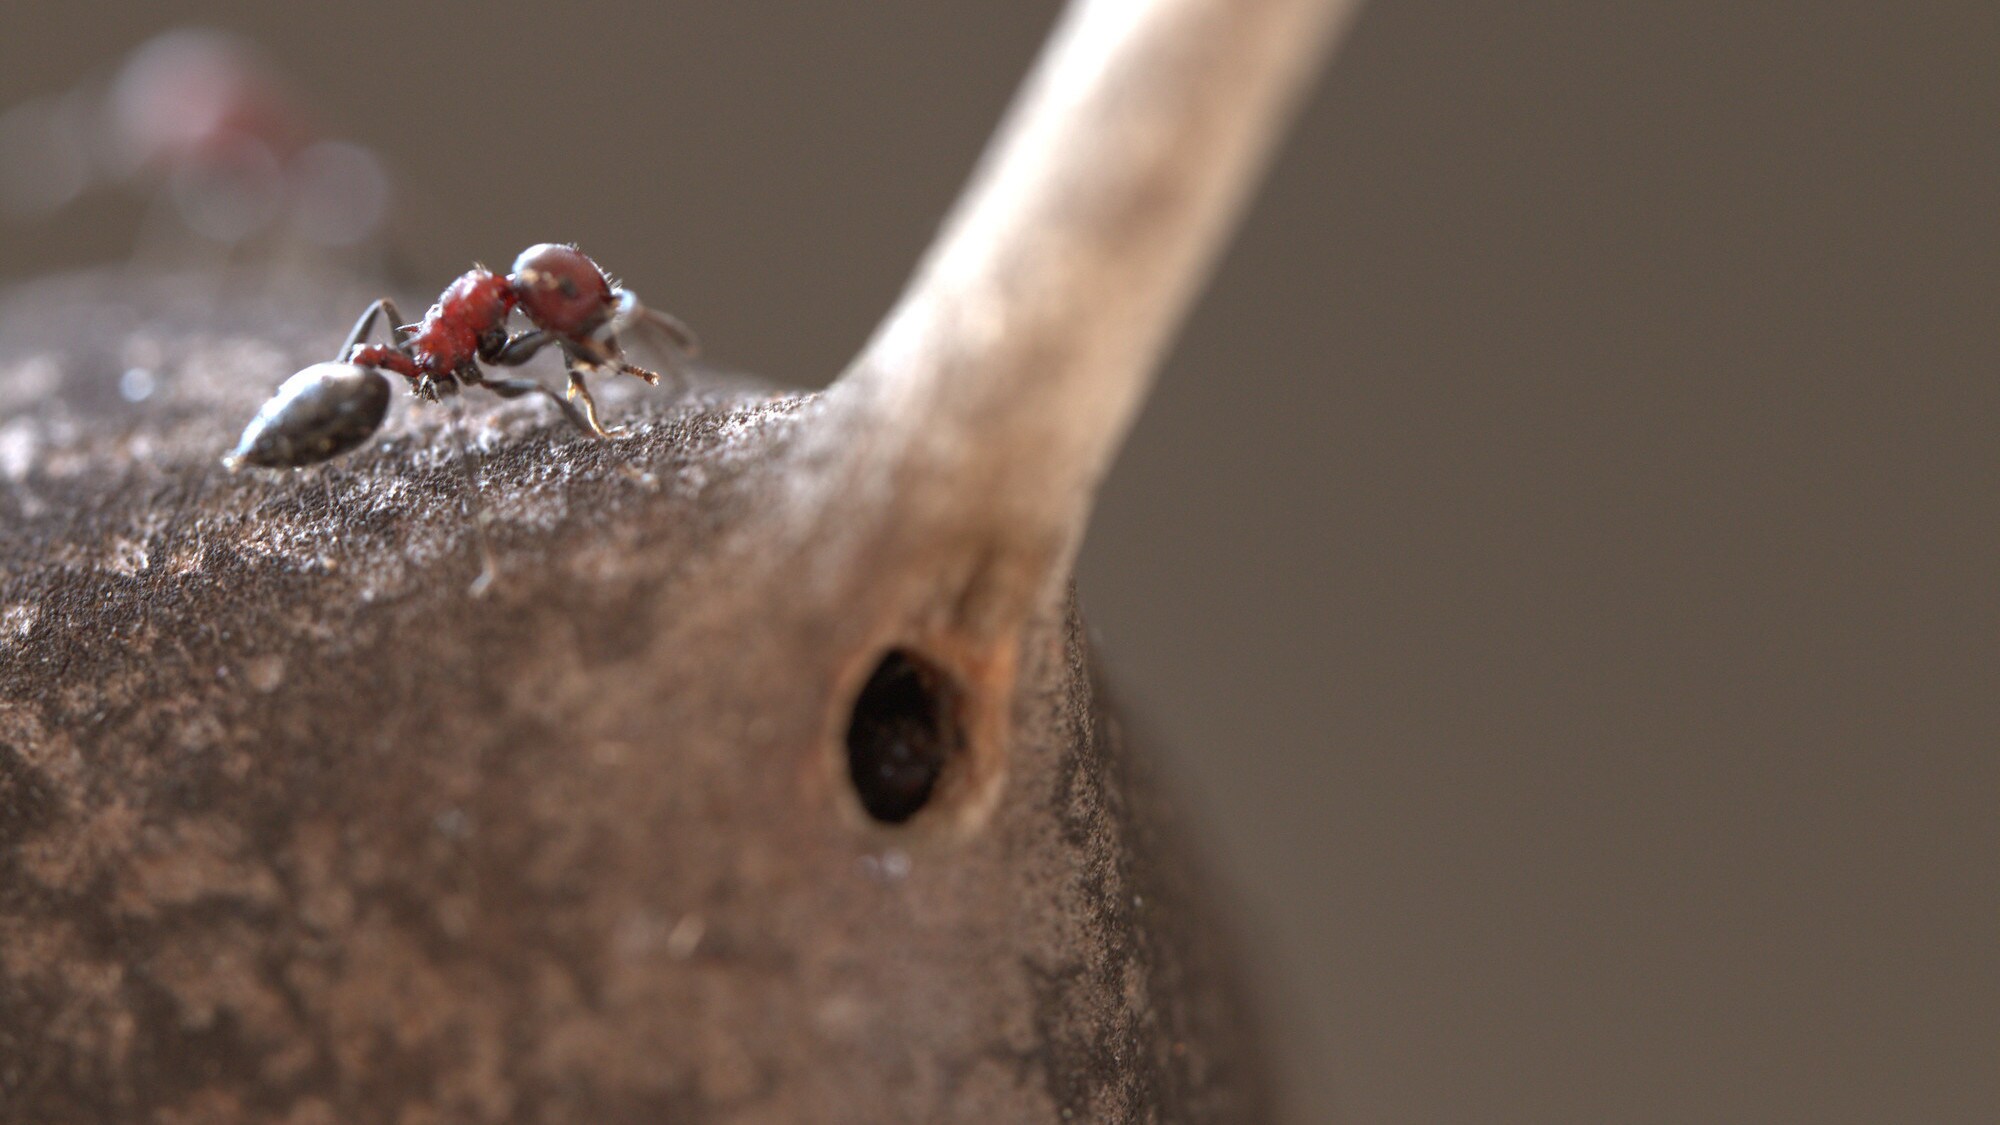 A tiny red headed acacia ant (Crematogaster mimosae) is pictured at her home entrance in the domatia (swollen acacia thorn base) at the Mount Kenya Wildlife Estate, Ol Pejeta, Nanyuki, Laikipia, Kenya in the "Land of Giants" episode of "A Real Bug's Life." (National Geographic/Rob Harvey)